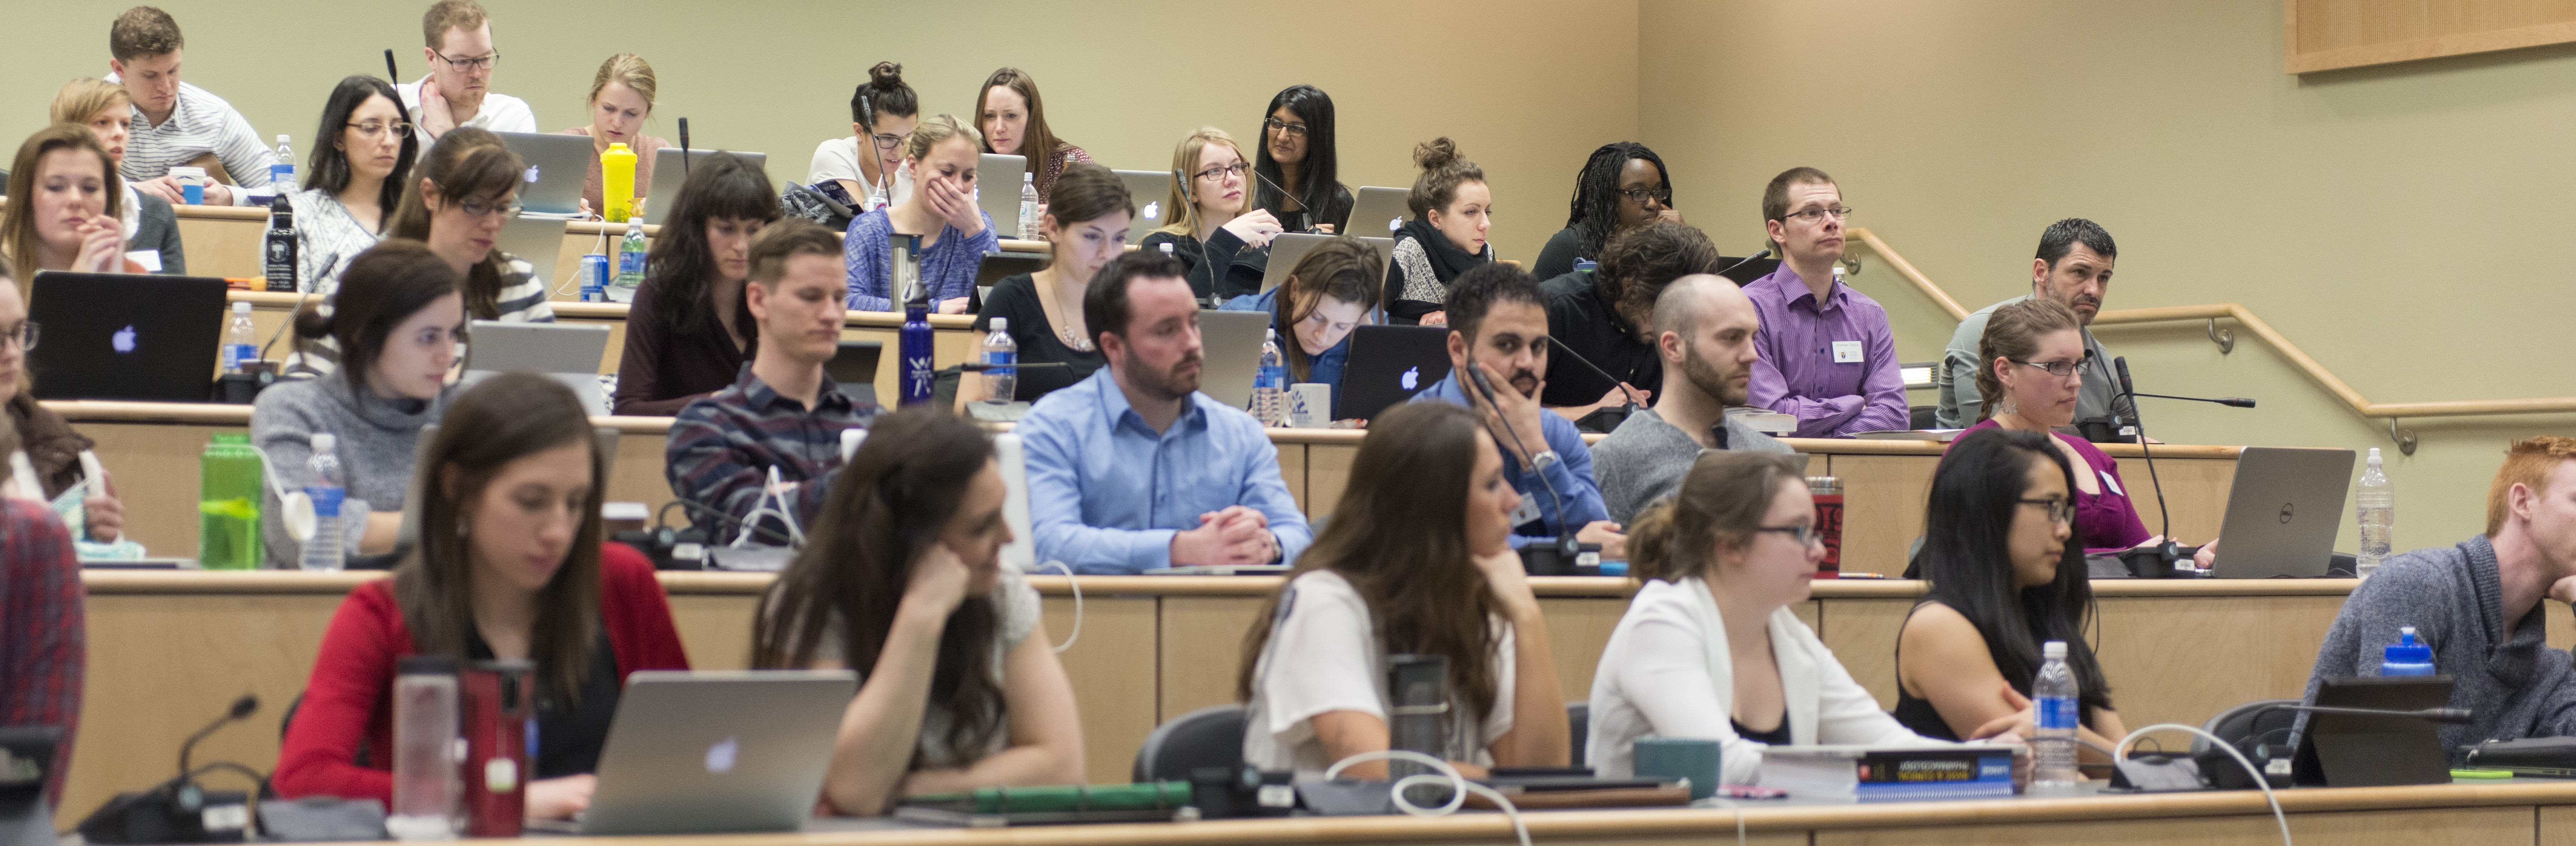 Photo of medical students sitting in lecture style classroom